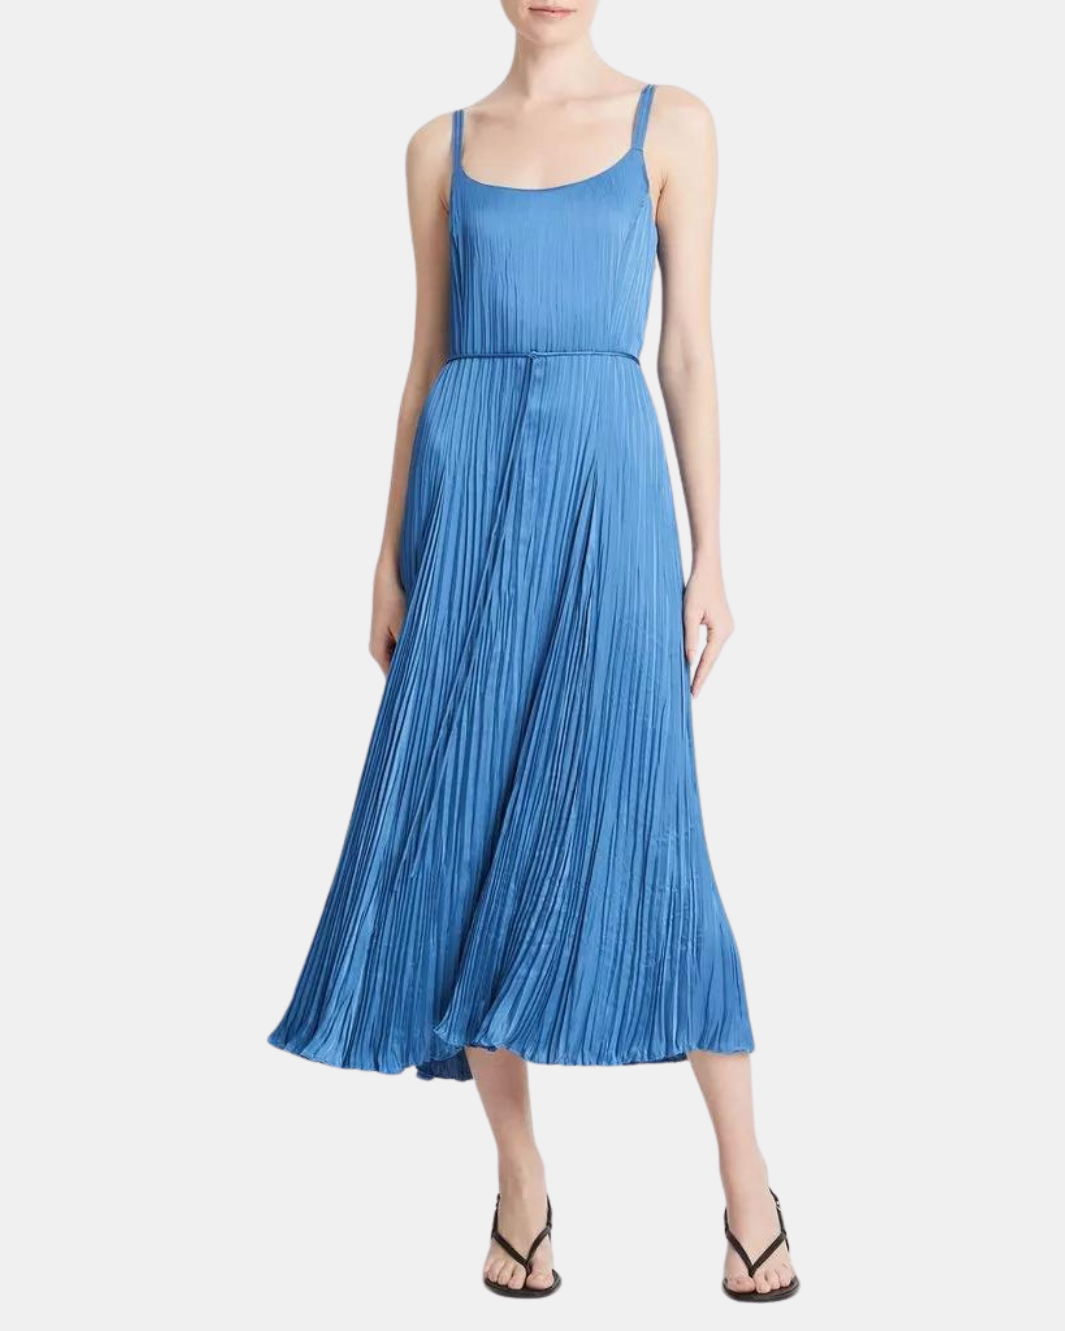 CRUSHED RELAXED SLIP DRESS IN CADET BLUE - Romi Boutique